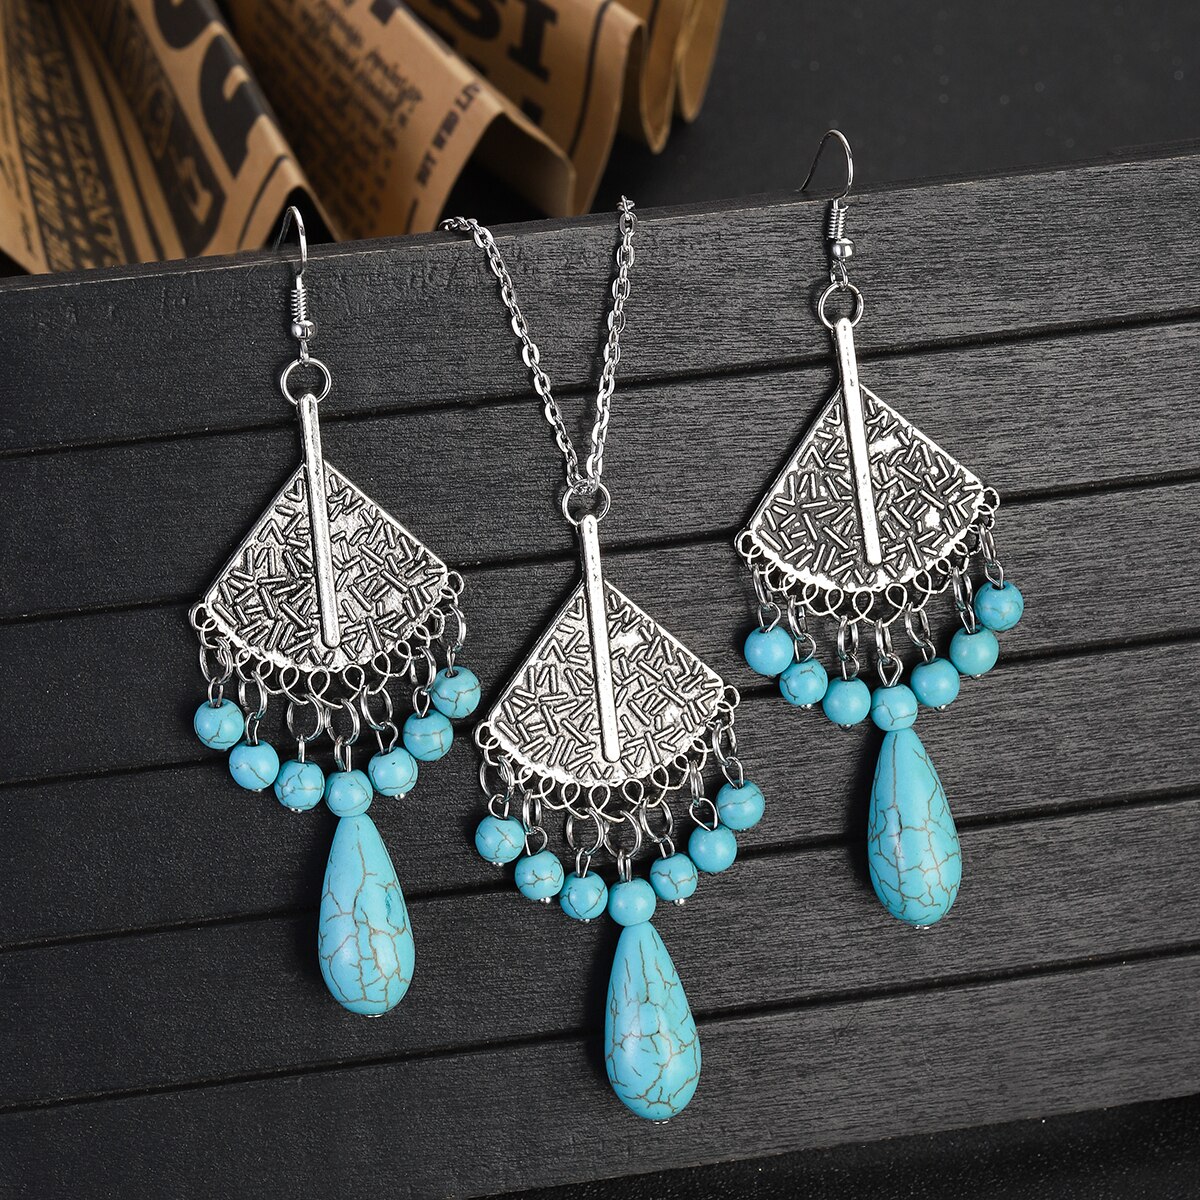 Ethnic-Boho-Blue-Stone-Tassel-Jewelry-Set-Charm-Ladies-Vintage-Jewelry-Silver-Color-Hollow-Flower-Ch-1005005134002231-9